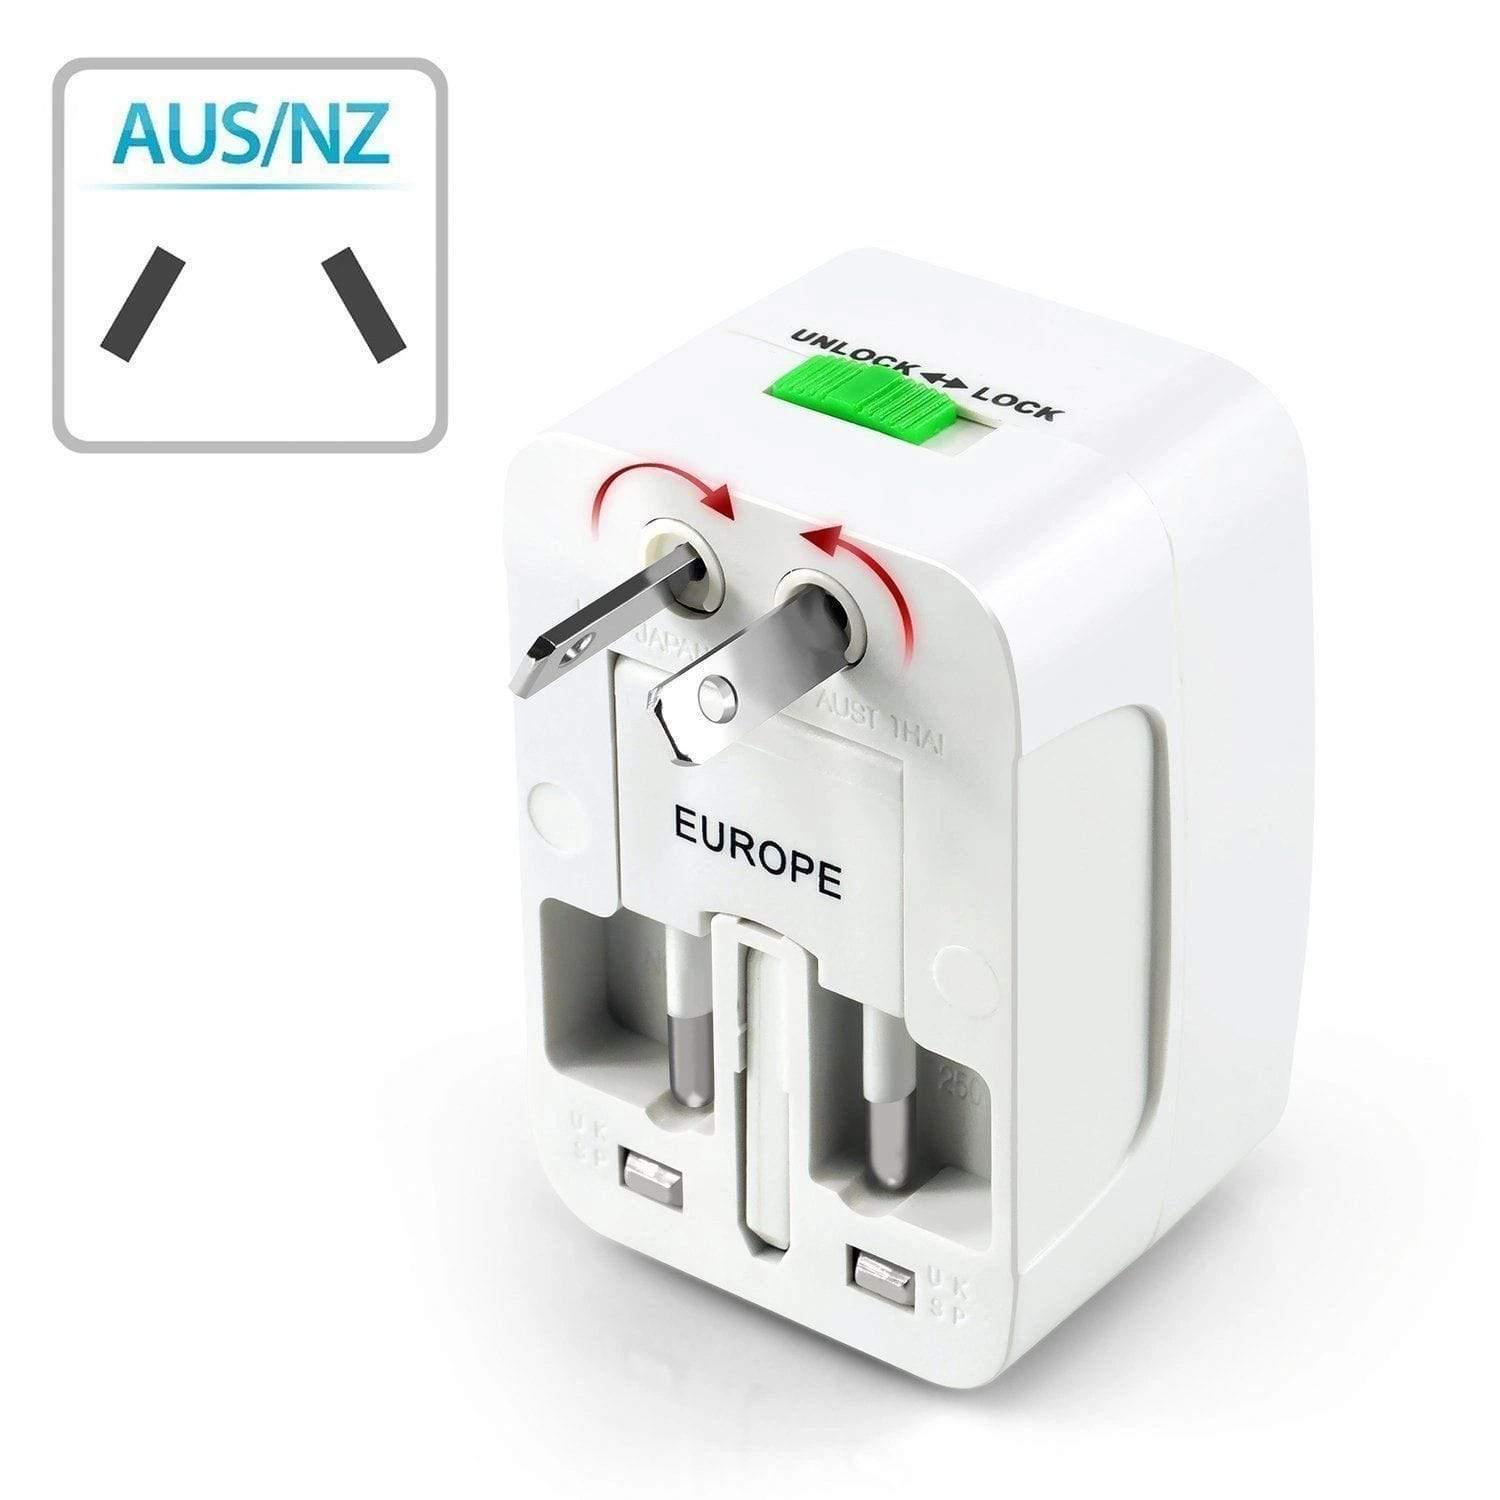 Dealsplant All in One World Wide Universal Travel Adapter Plug (7.0 x 5.0 x 4.0 cm)-Chargers-dealsplant